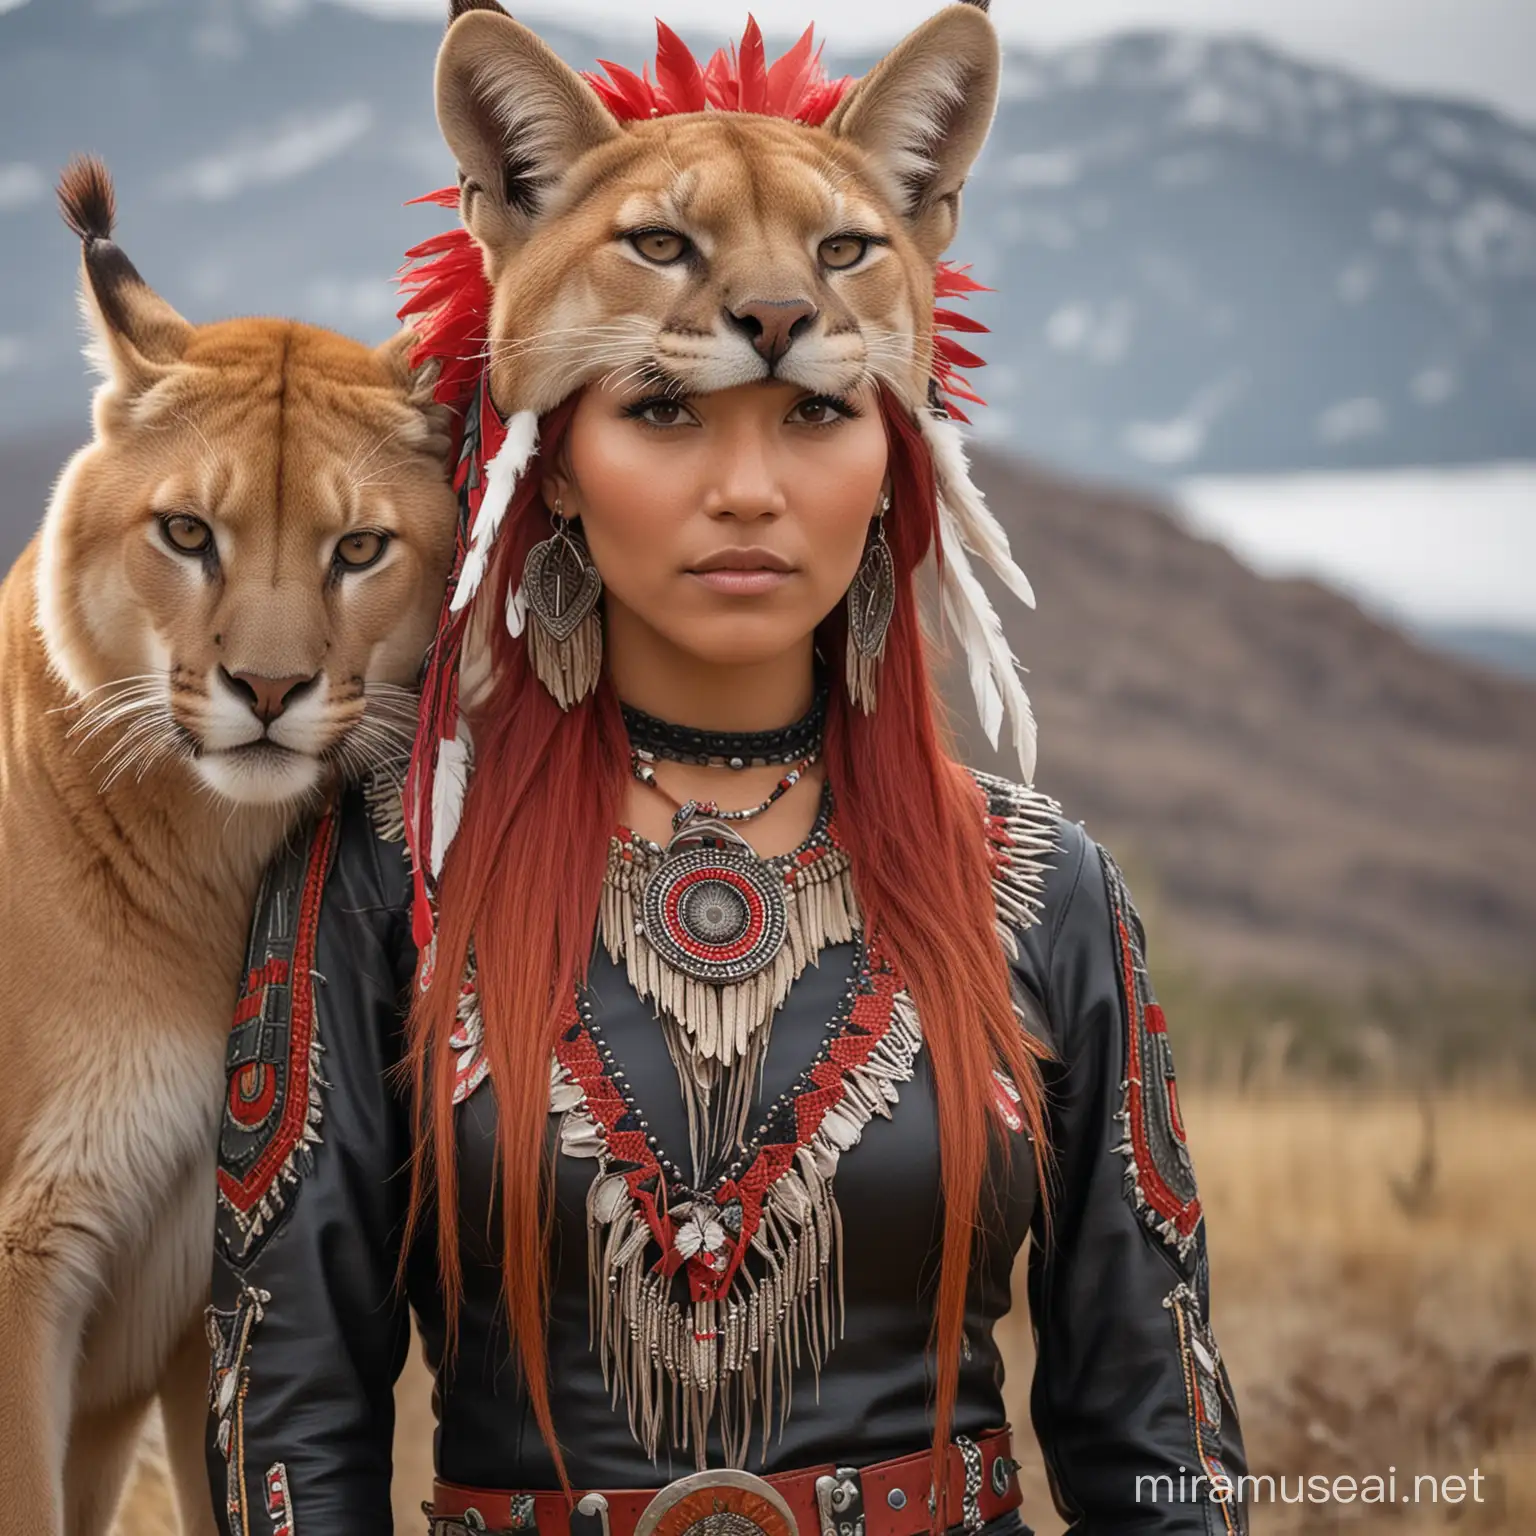 RedHaired Native American Woman in Red and Black Leather with Mountain Lion Headdress